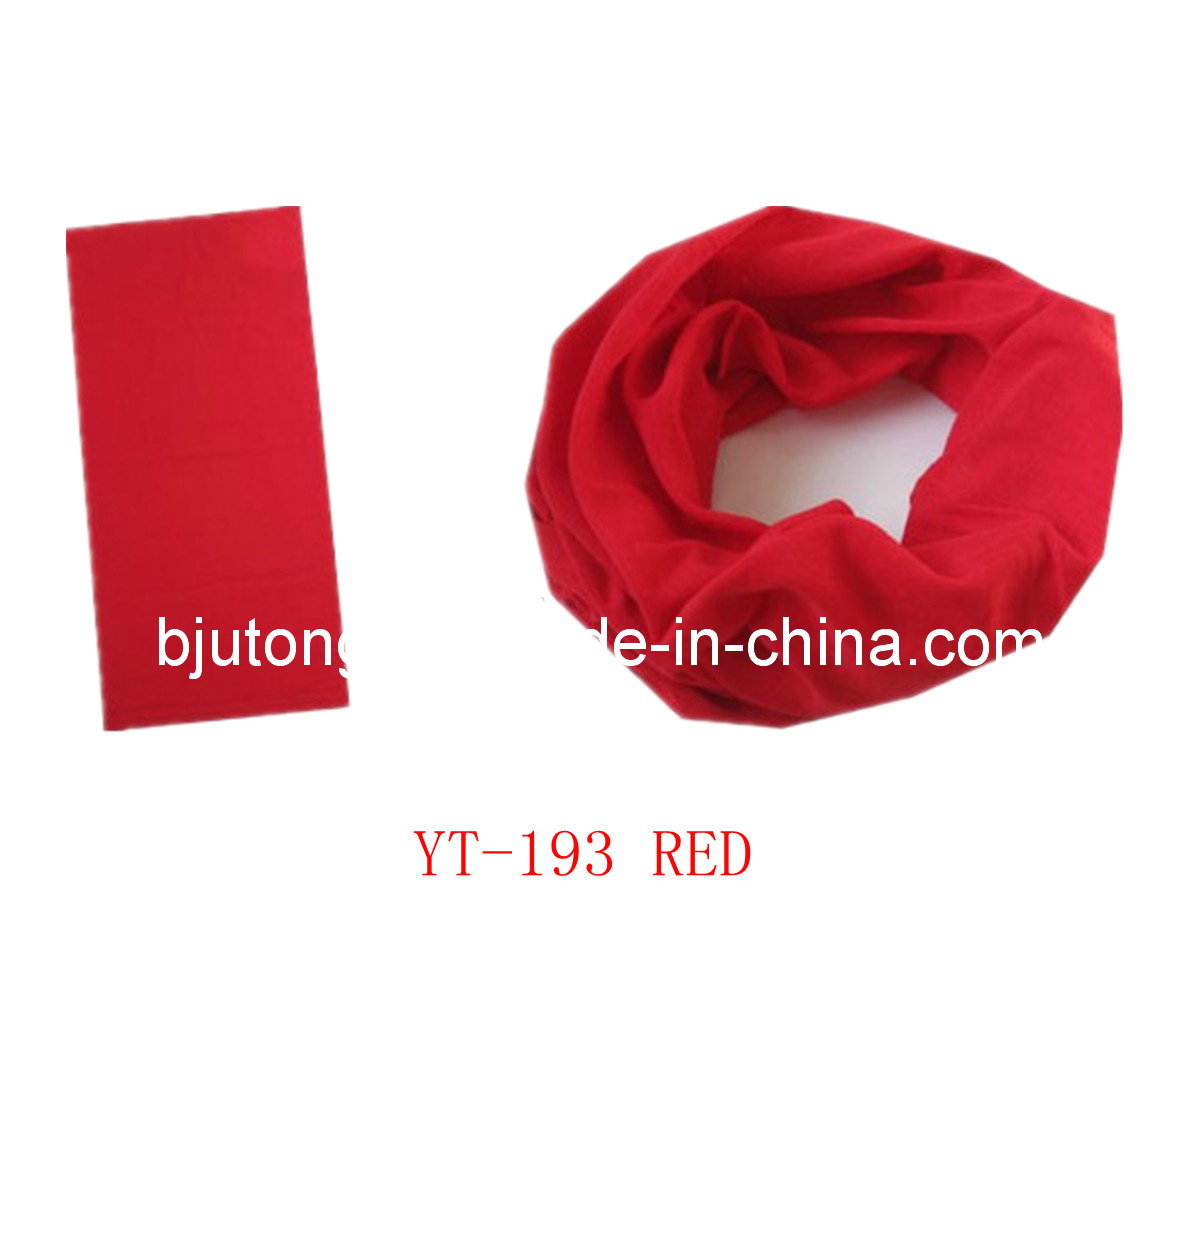 Tubular Scarf in Solid Color (YT- 193)